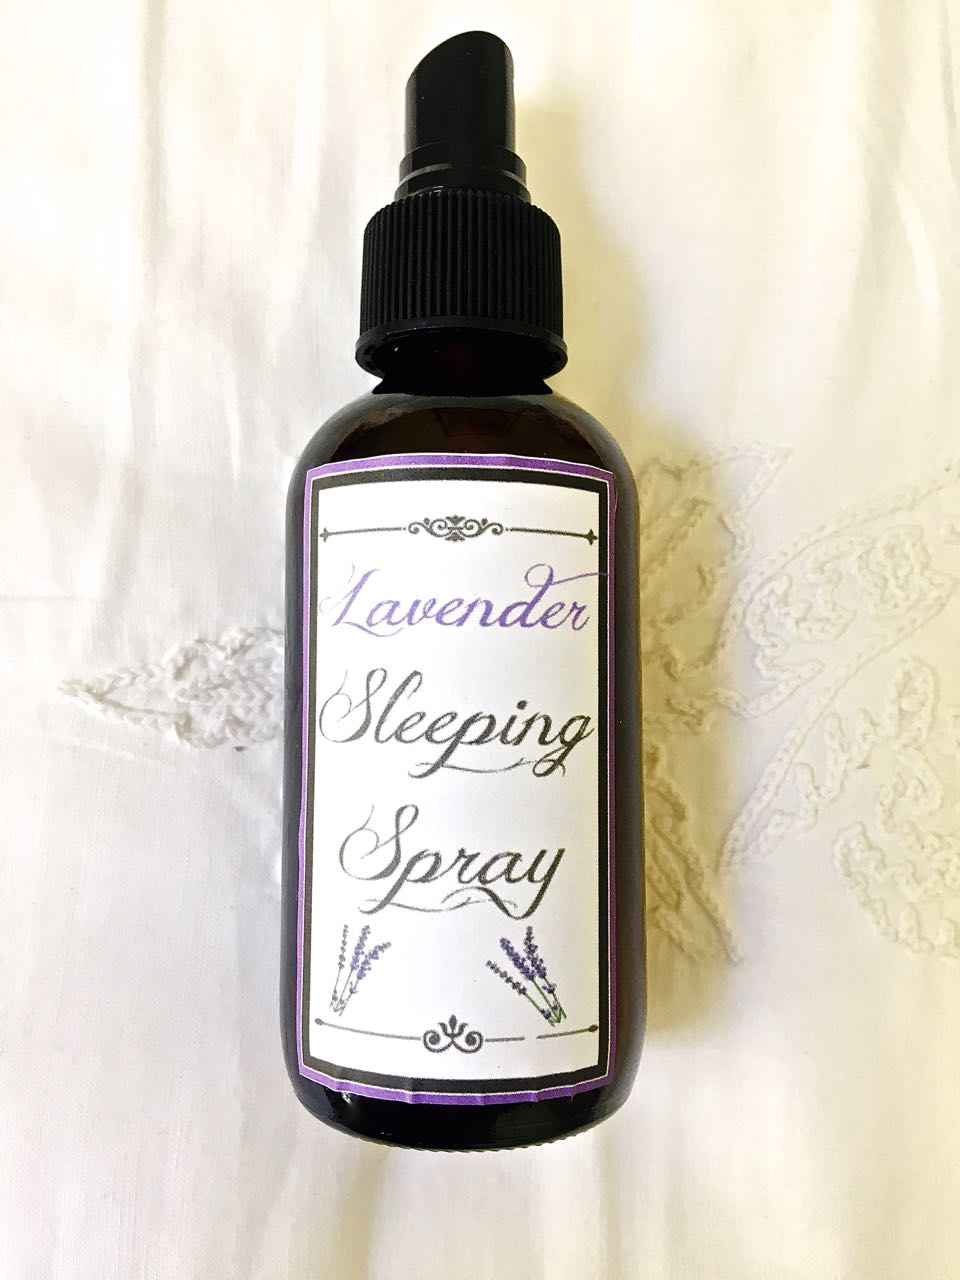 How to Make Soothing Lavender Sleep Spray